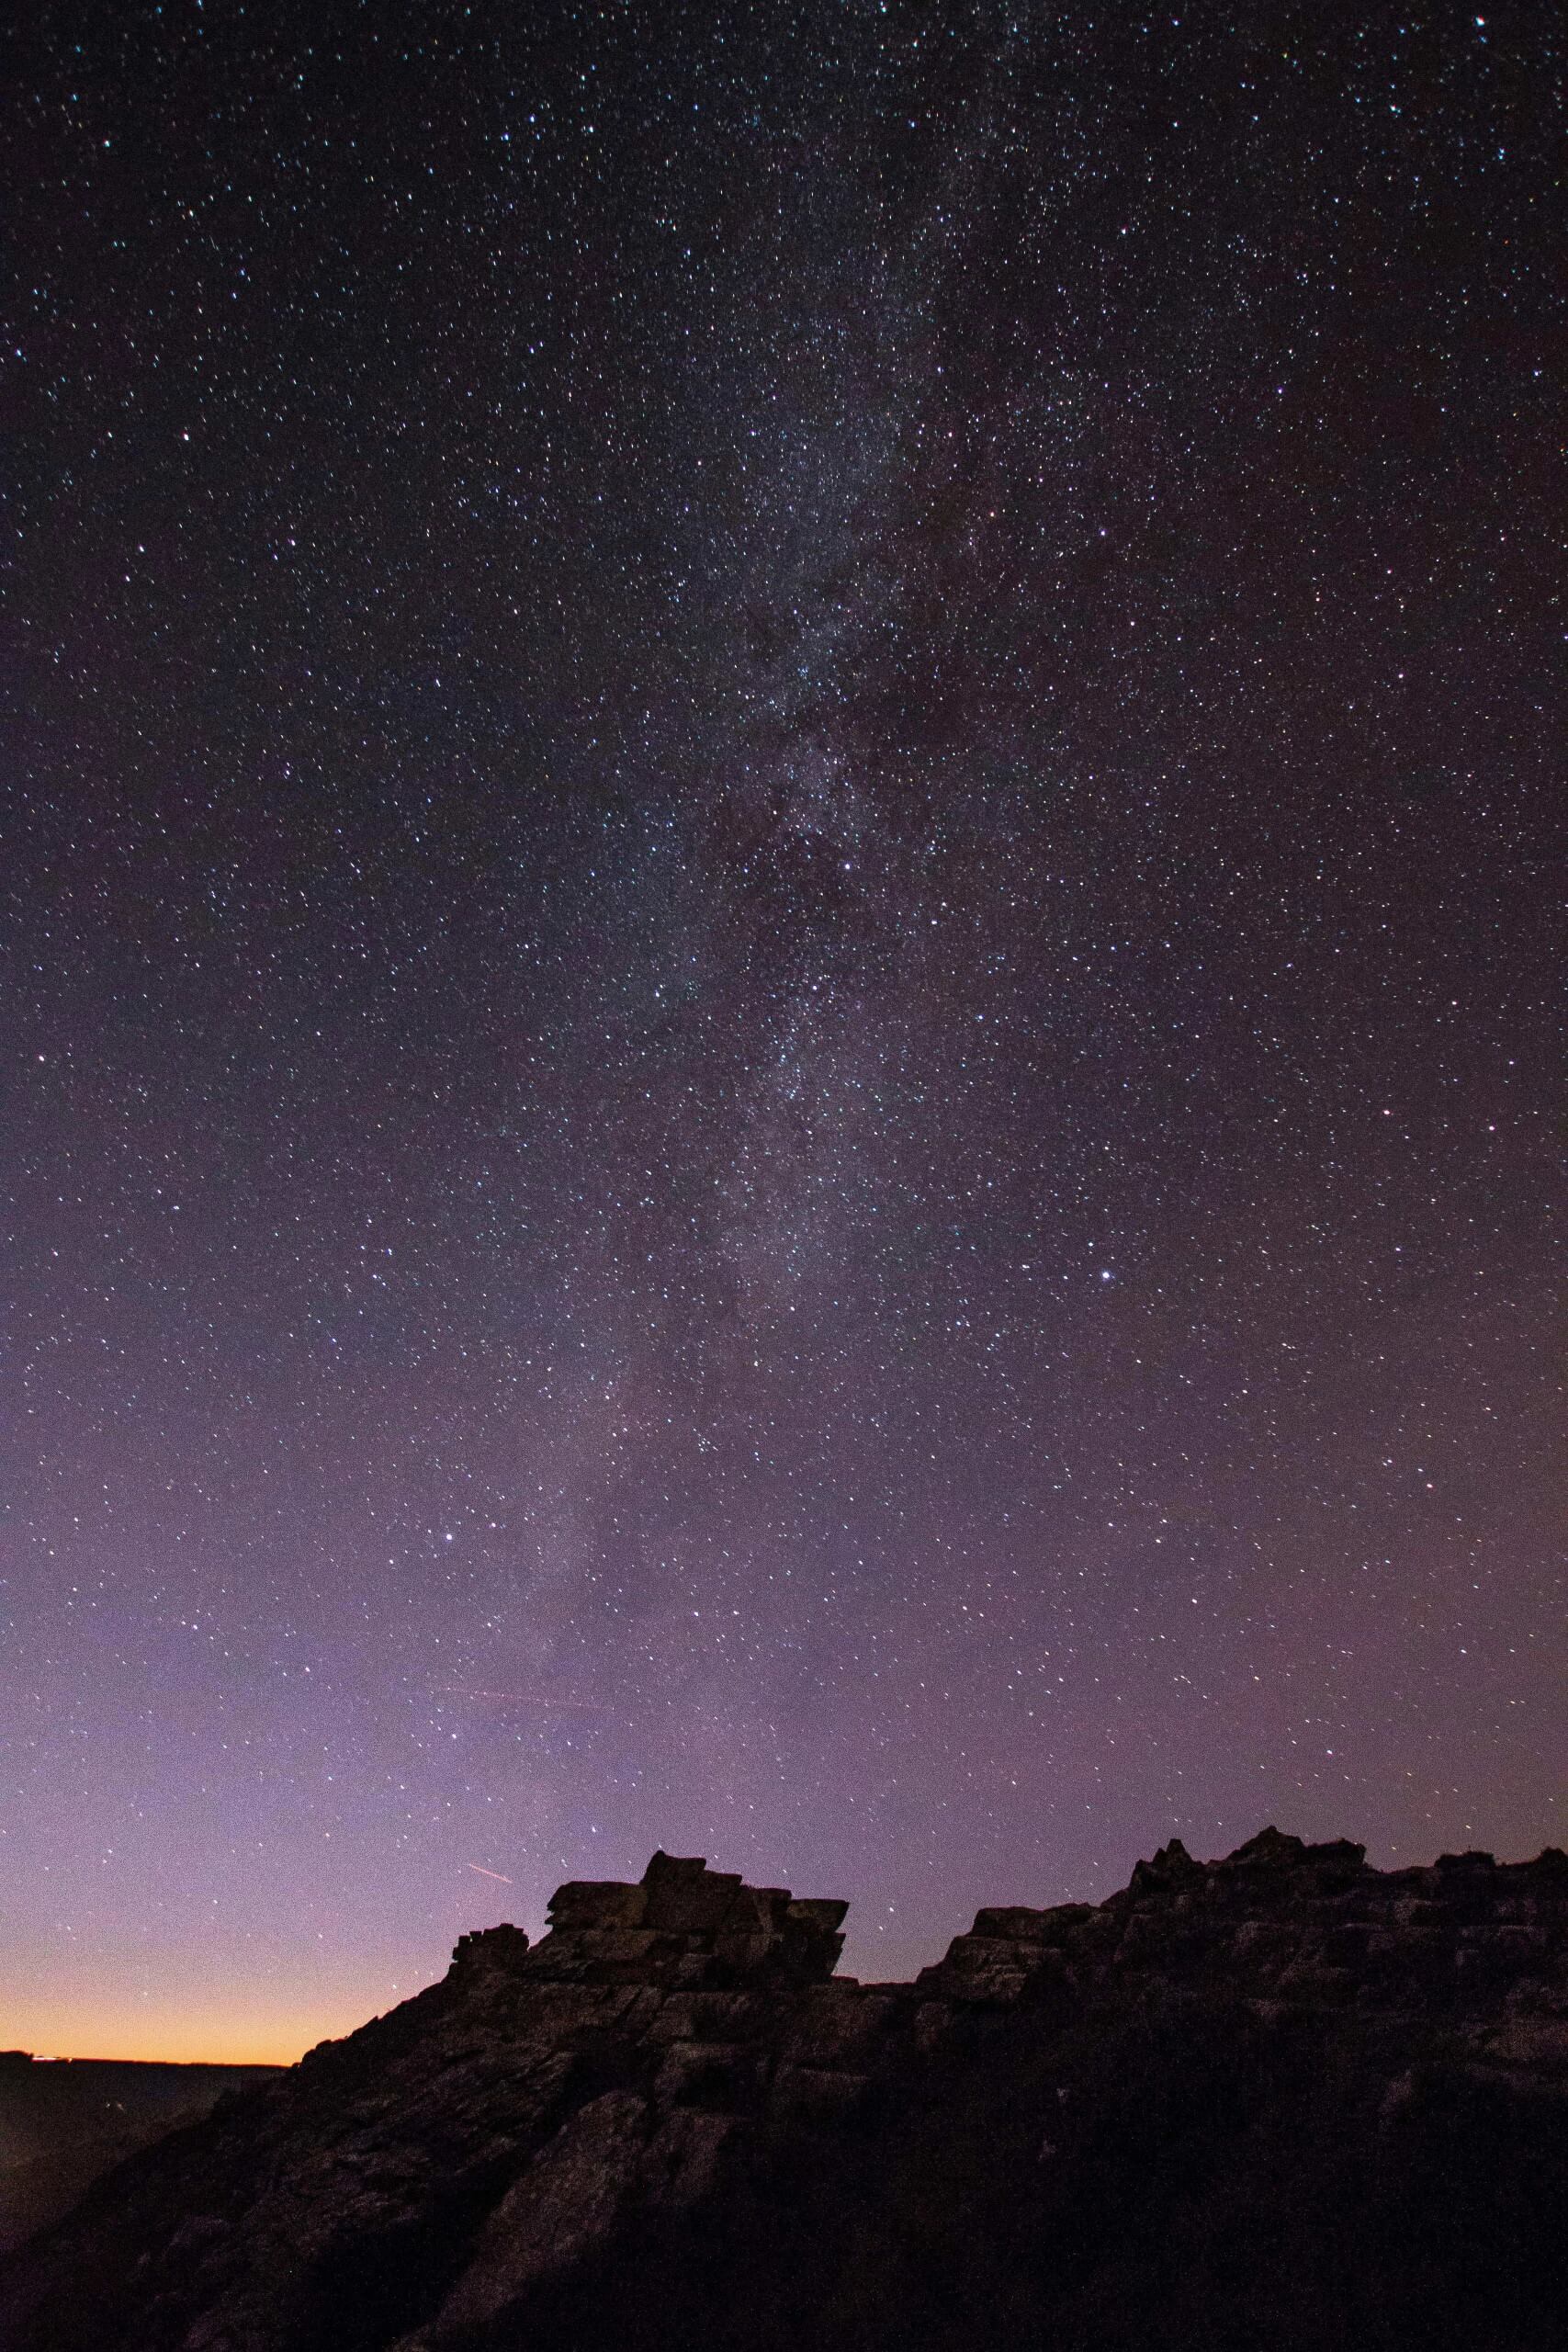 The Milky Way At The Valley of Rocks